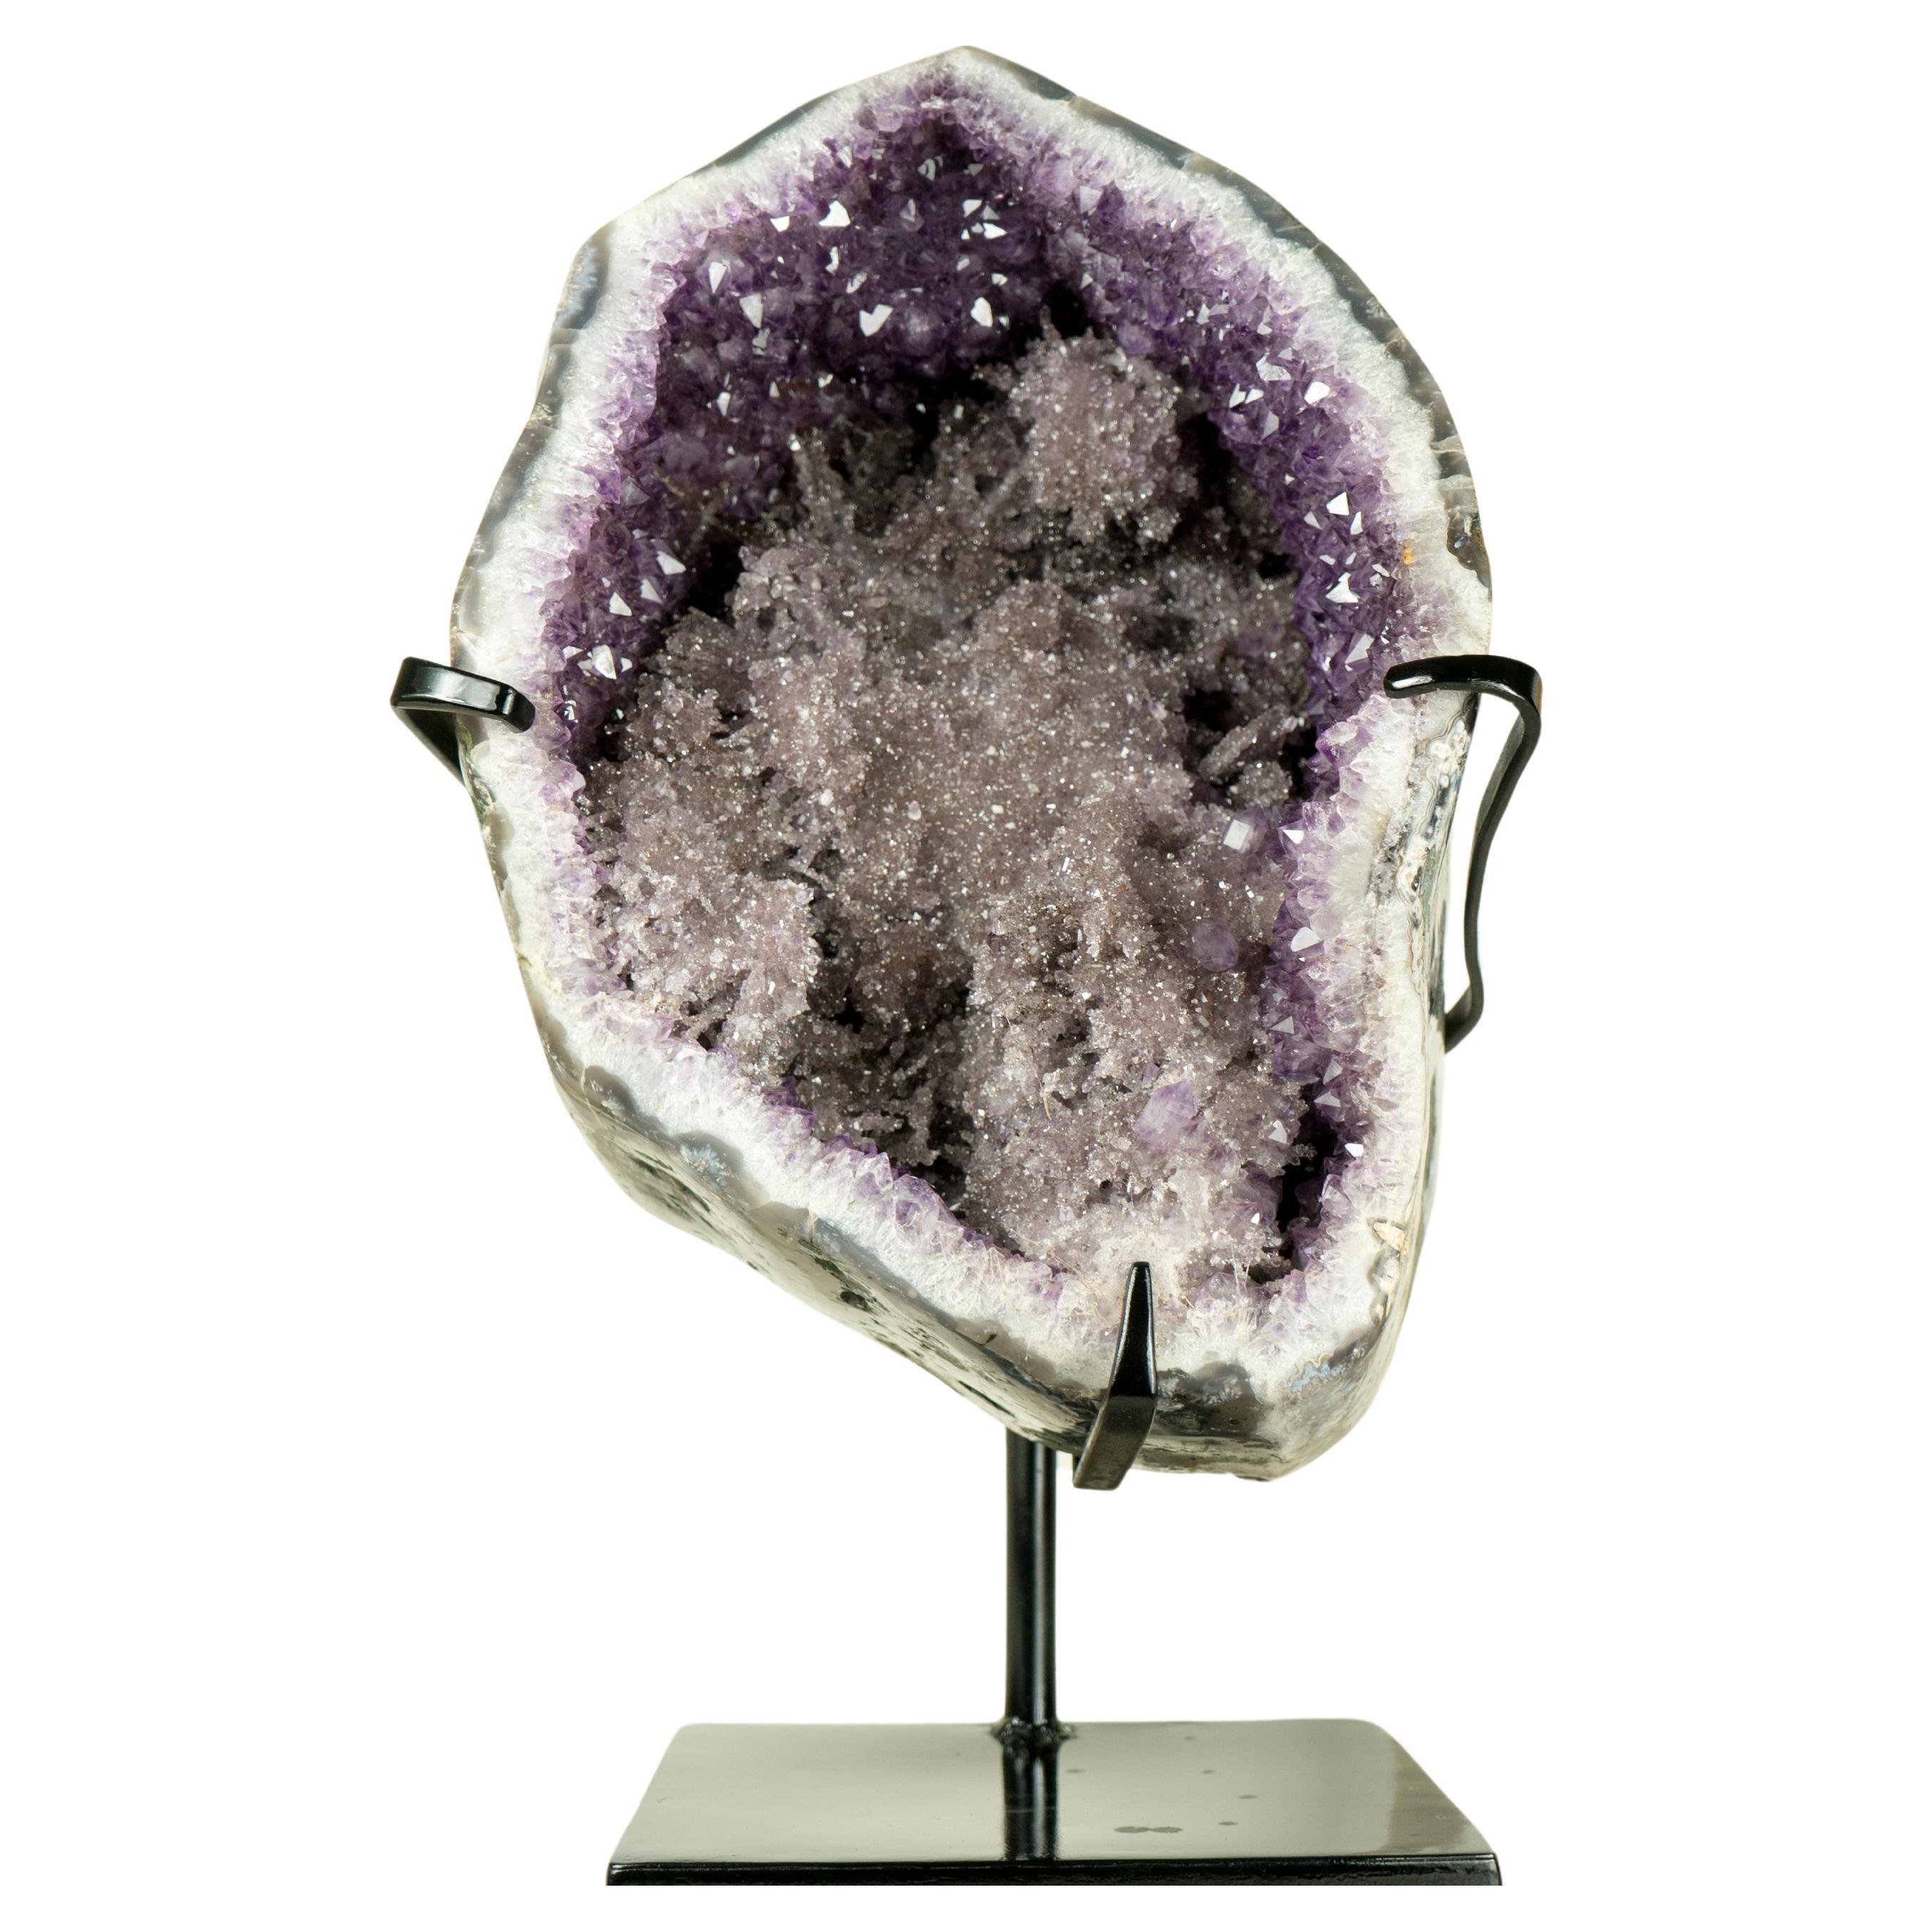 Rare Amethyst Geode with Rosette Crystals and Herkimer Diamond-like Clarity  For Sale